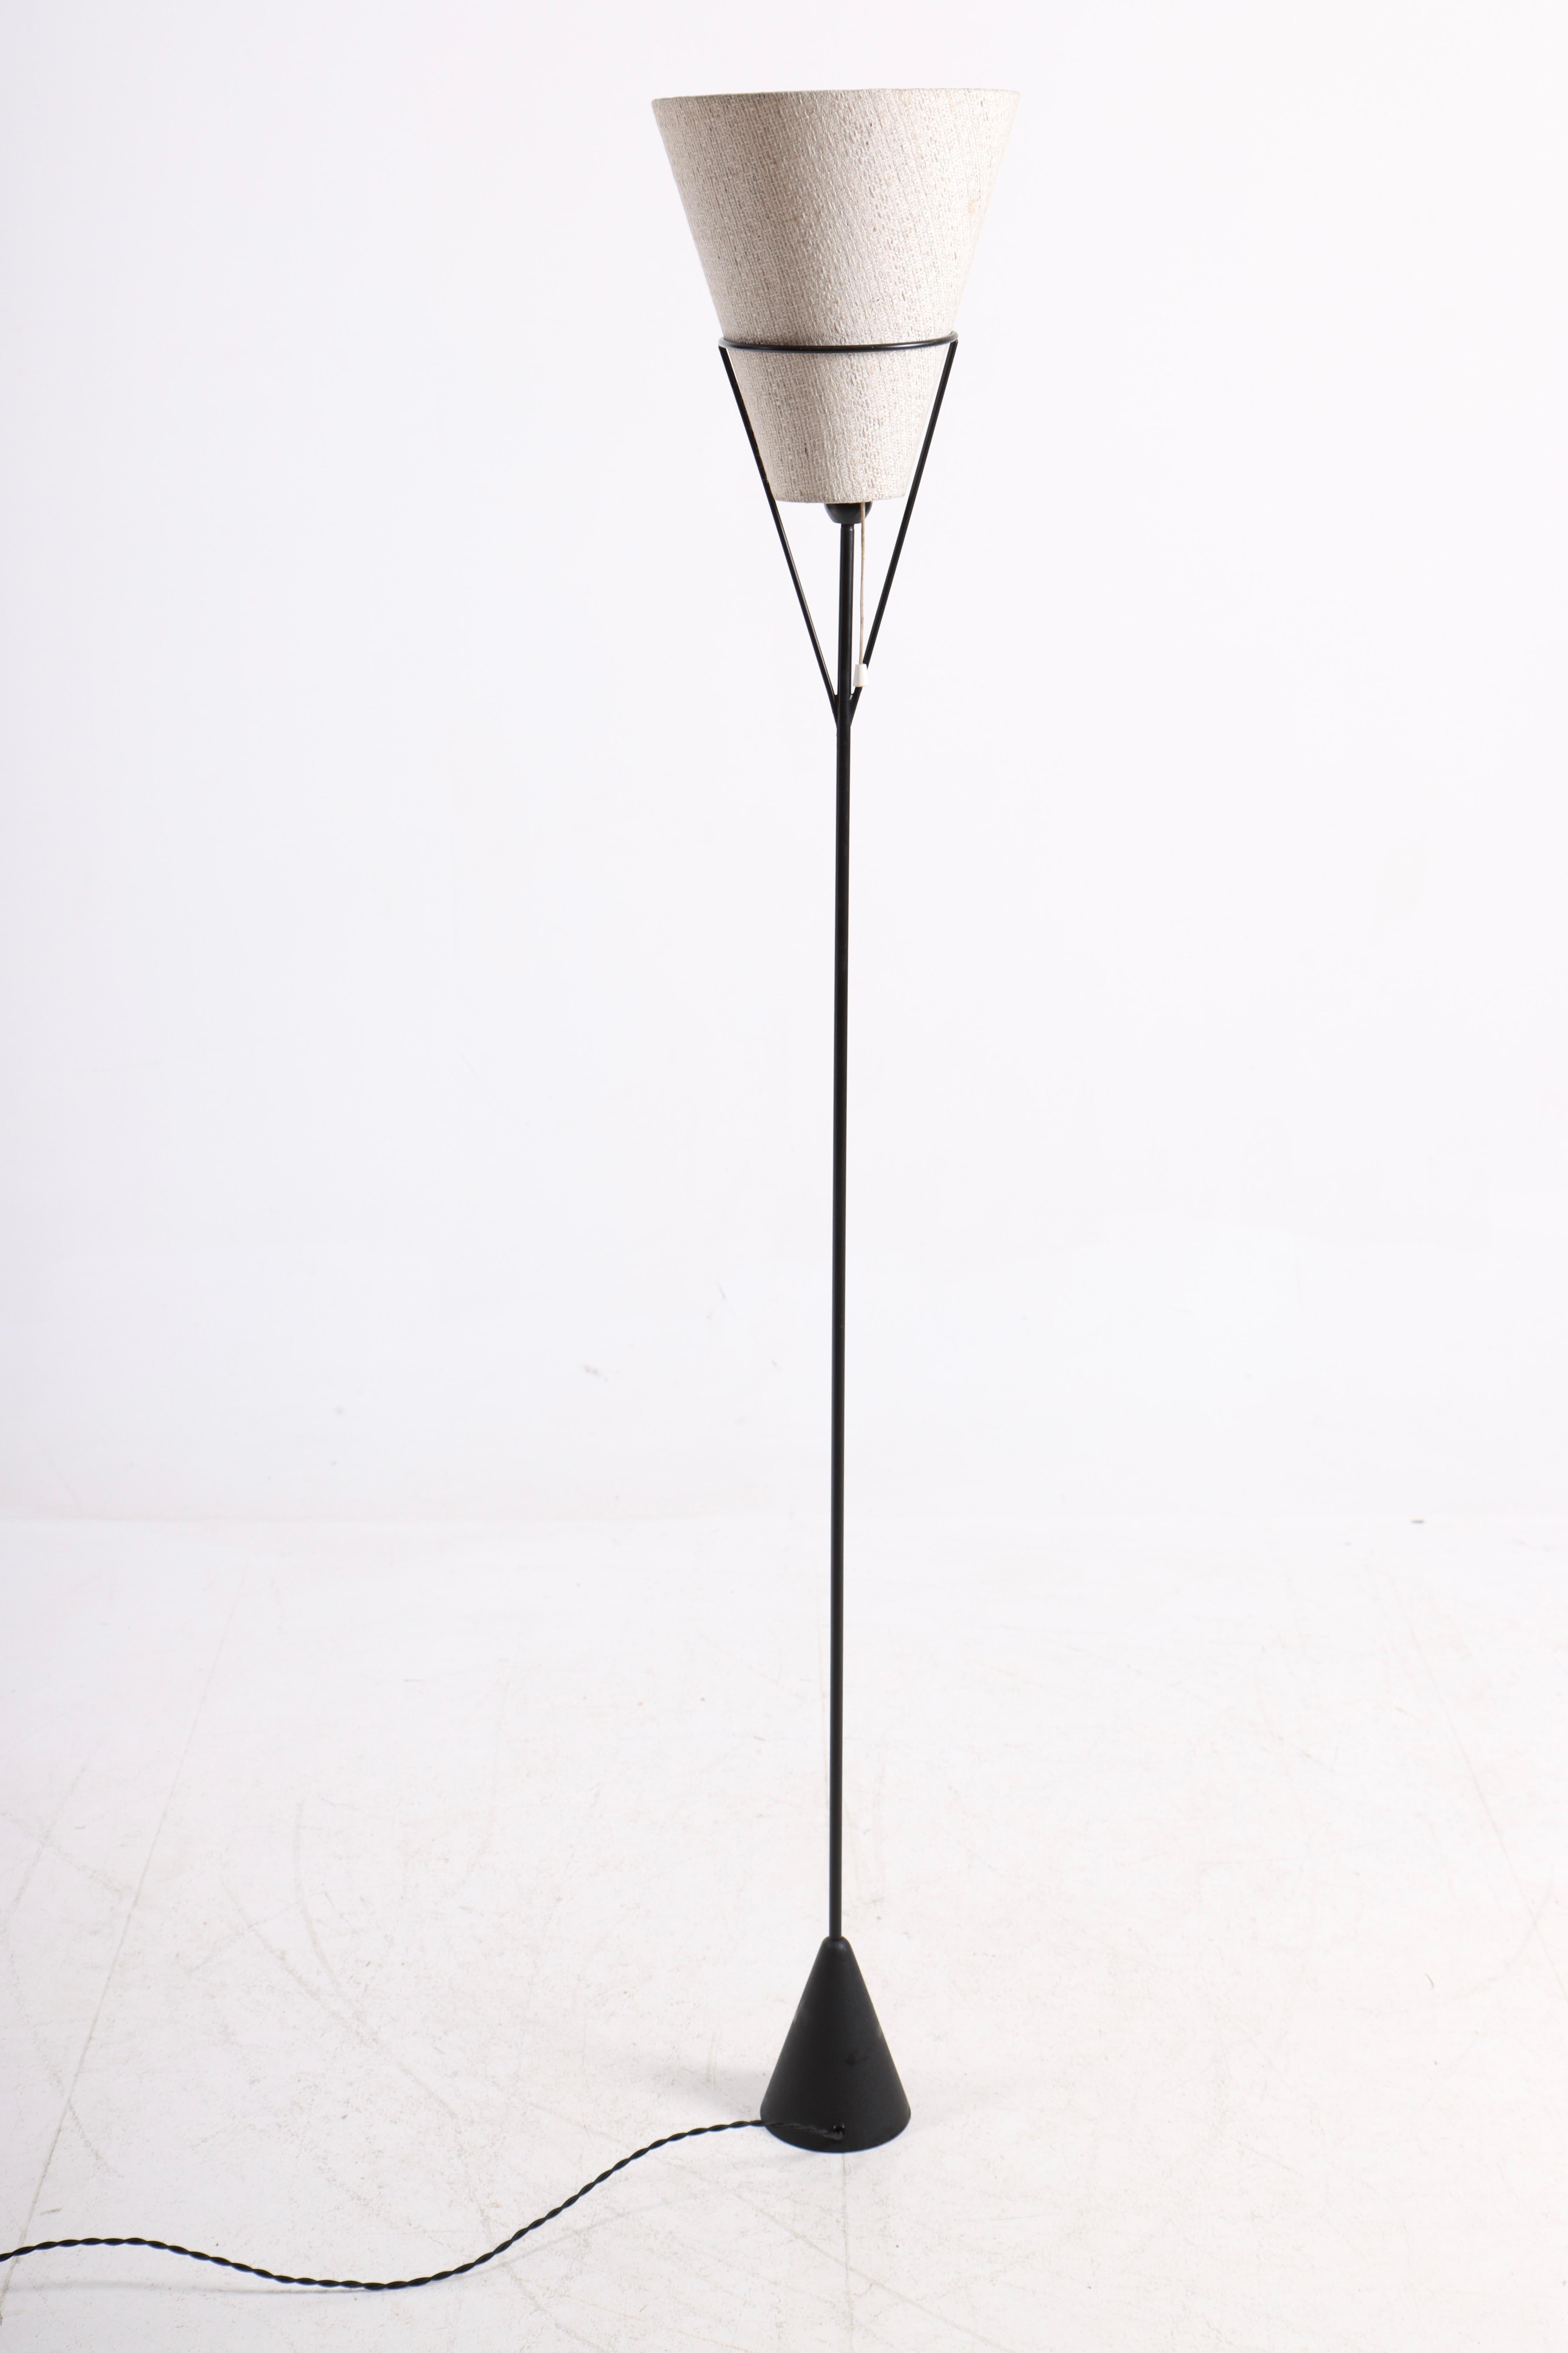 Floor lamp in patinated iron. Made in Denmark in the 1950s. Original condition.